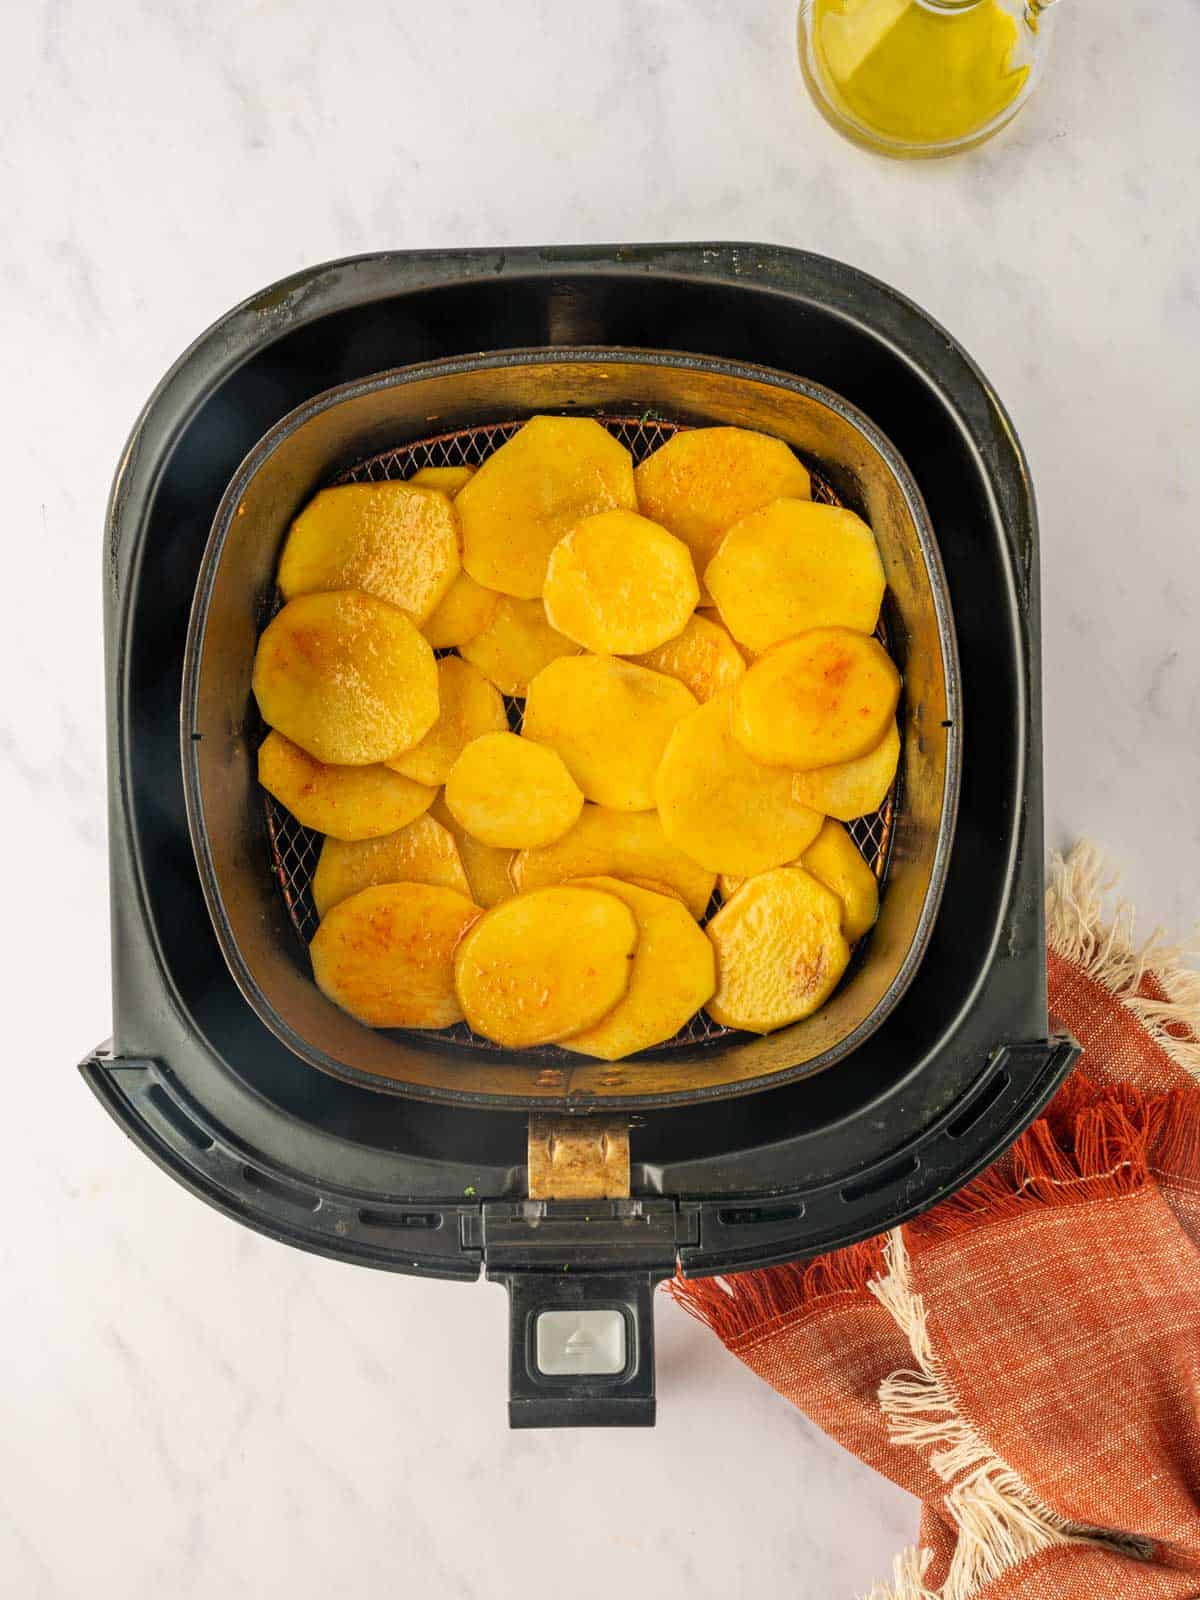 Seasoned potatoes are layered in an air fryer.